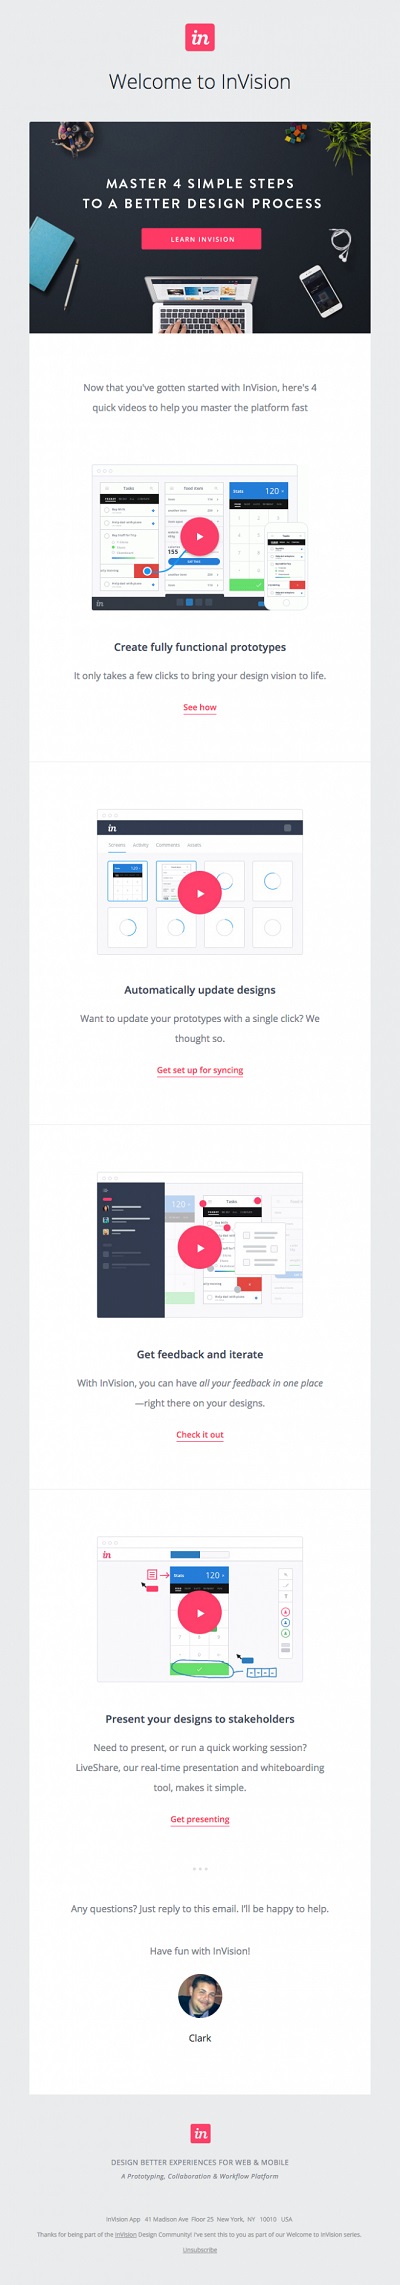 InVision-email.jpg